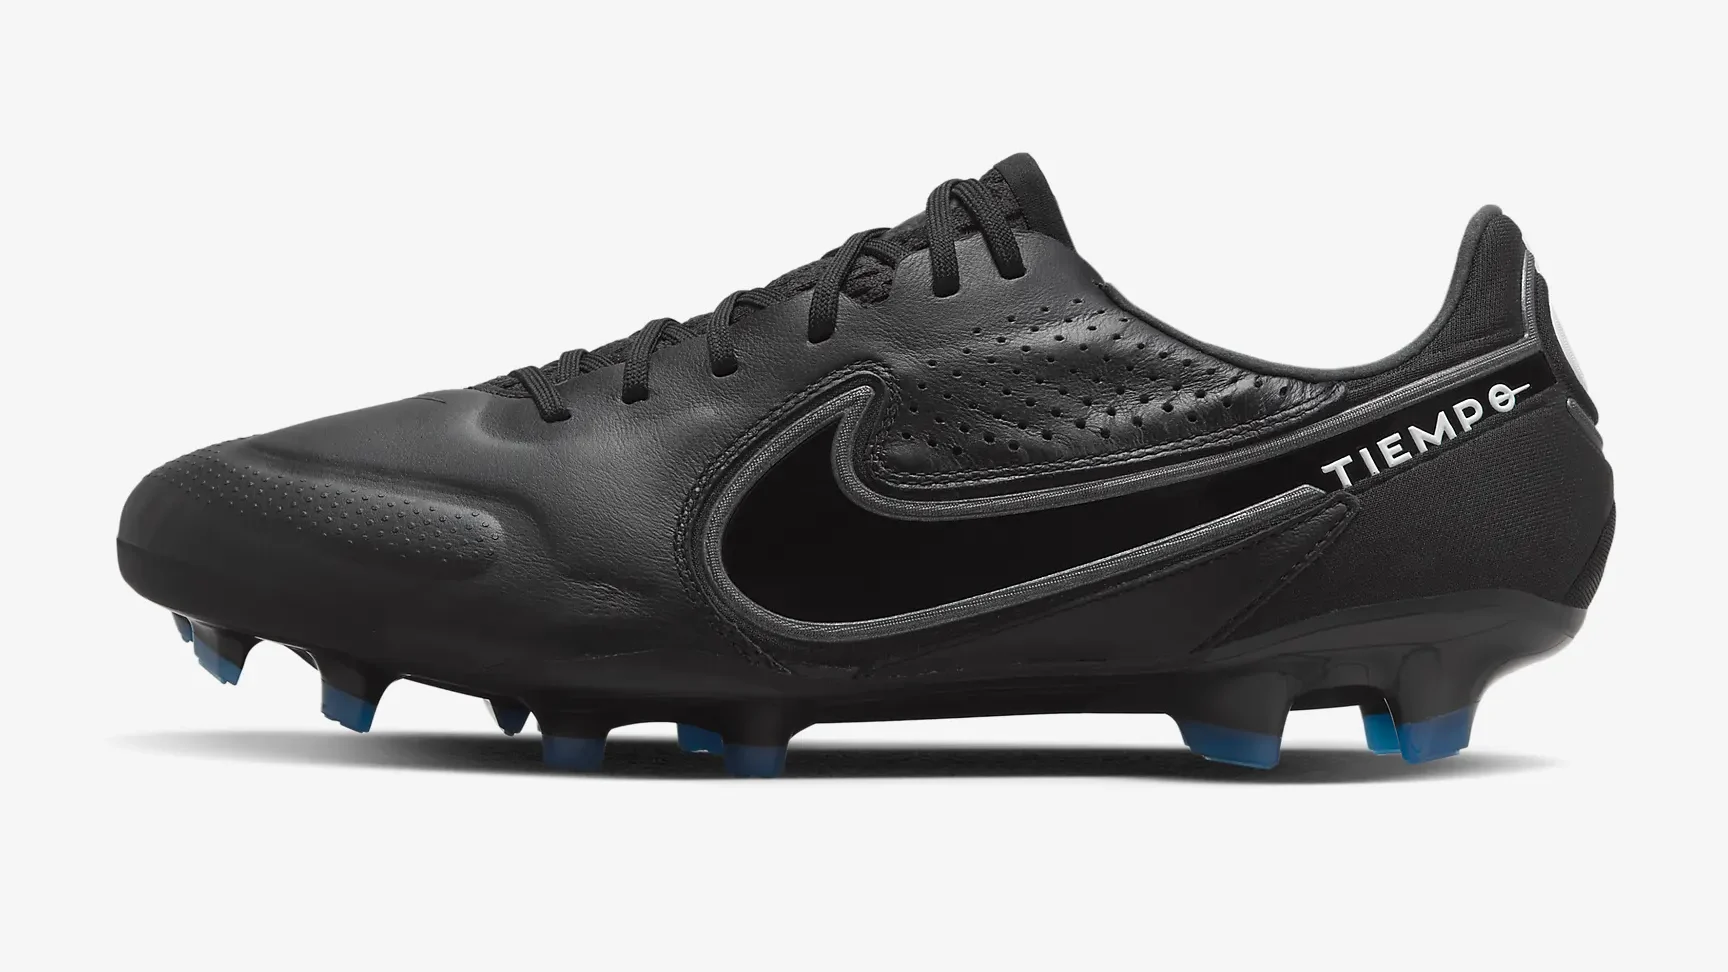 Best soccer cleats for wide feet: Nike Tiempo Legend Series